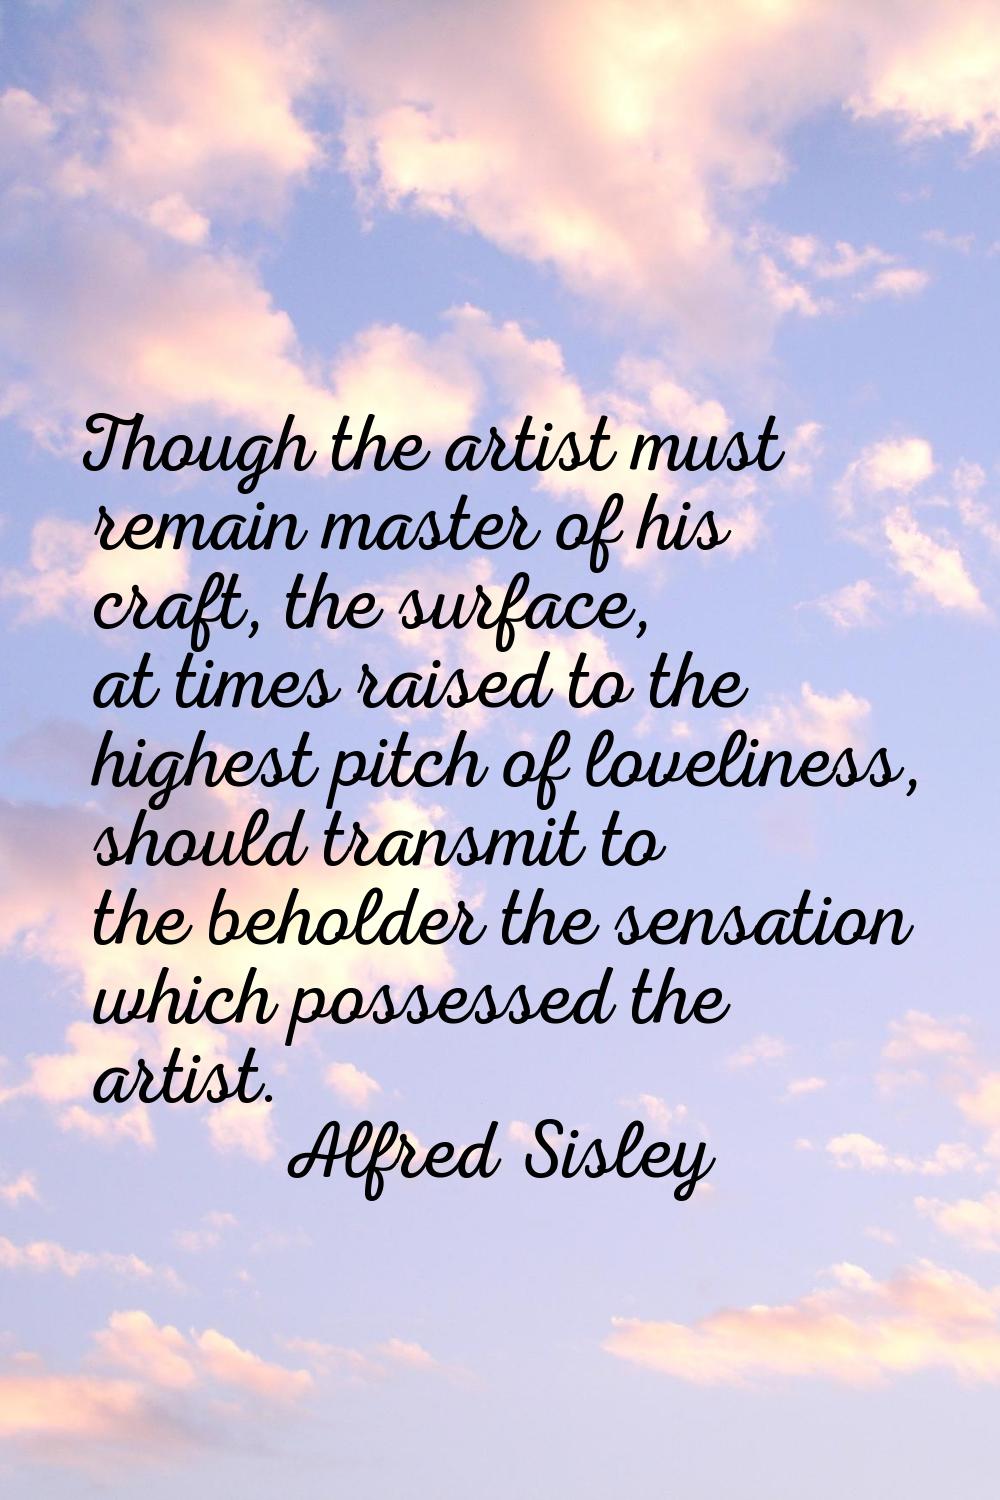 Though the artist must remain master of his craft, the surface, at times raised to the highest pitc